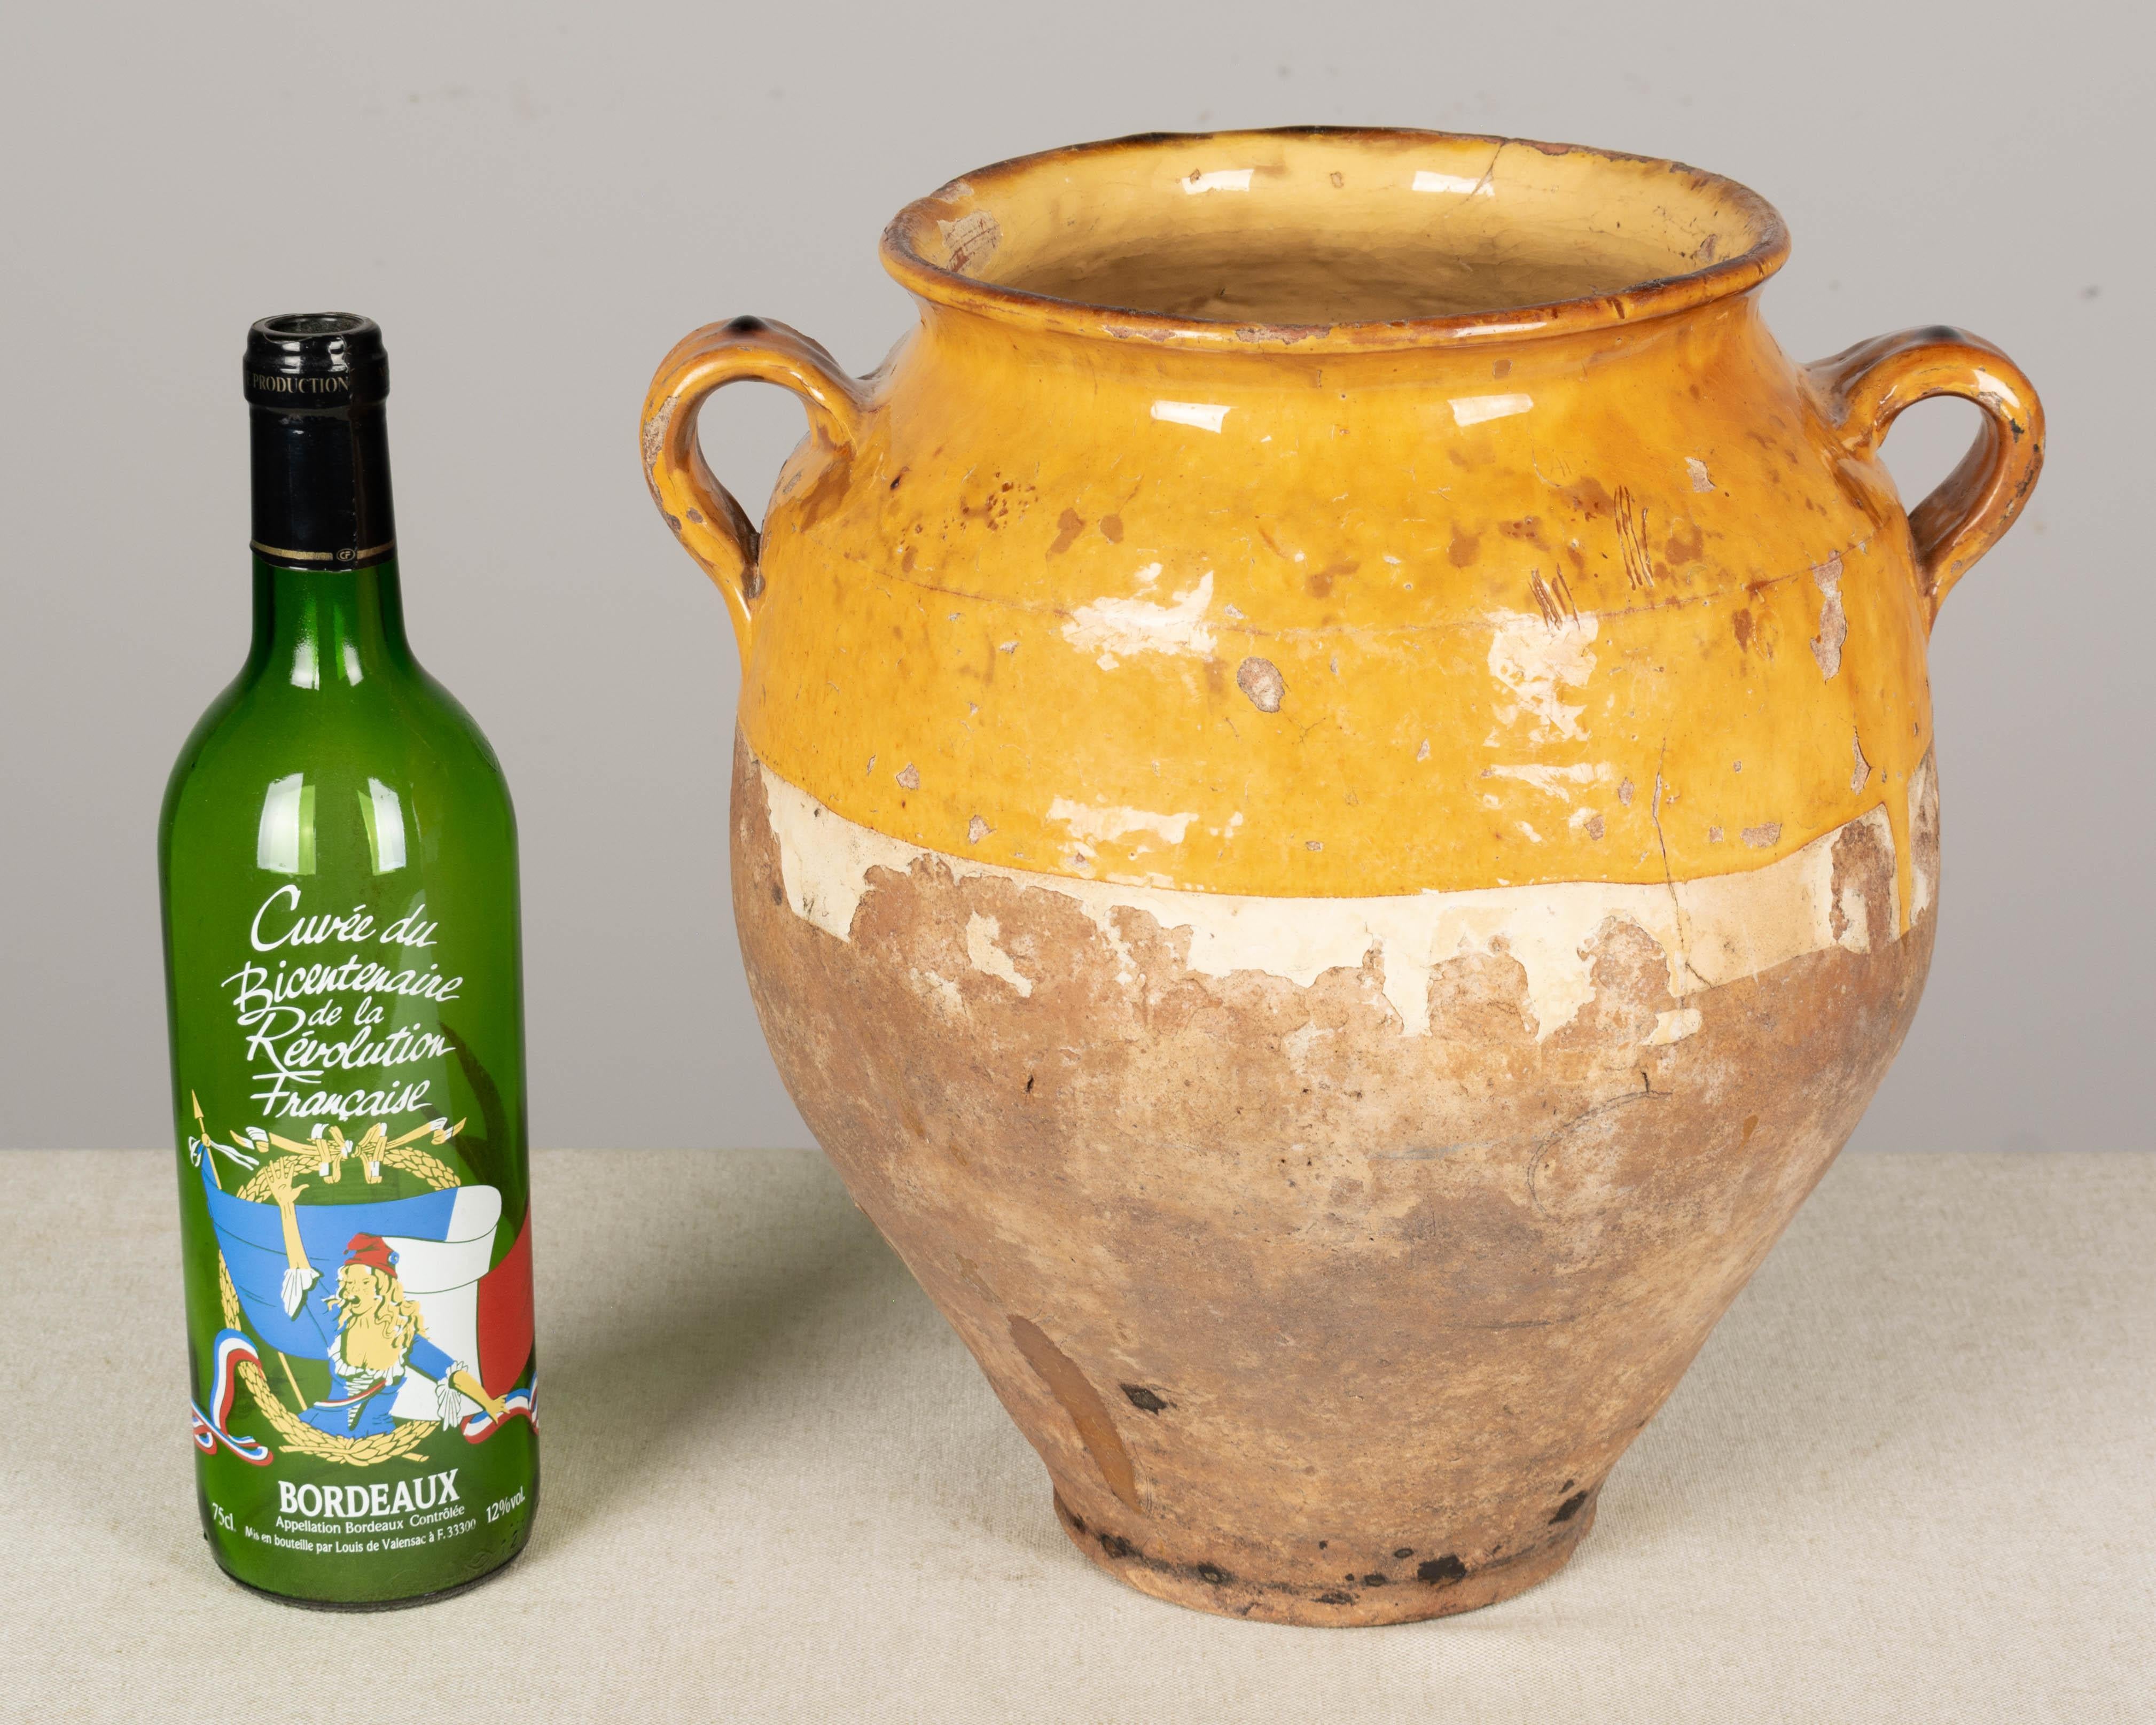 A 19th century earthenware confit pot from the Southwest of France with traditional yellow ochre glaze. Chips, cracks and losses to glaze. These ordinary earthenware vessels were once used daily in the French country home and have beautiful rustic